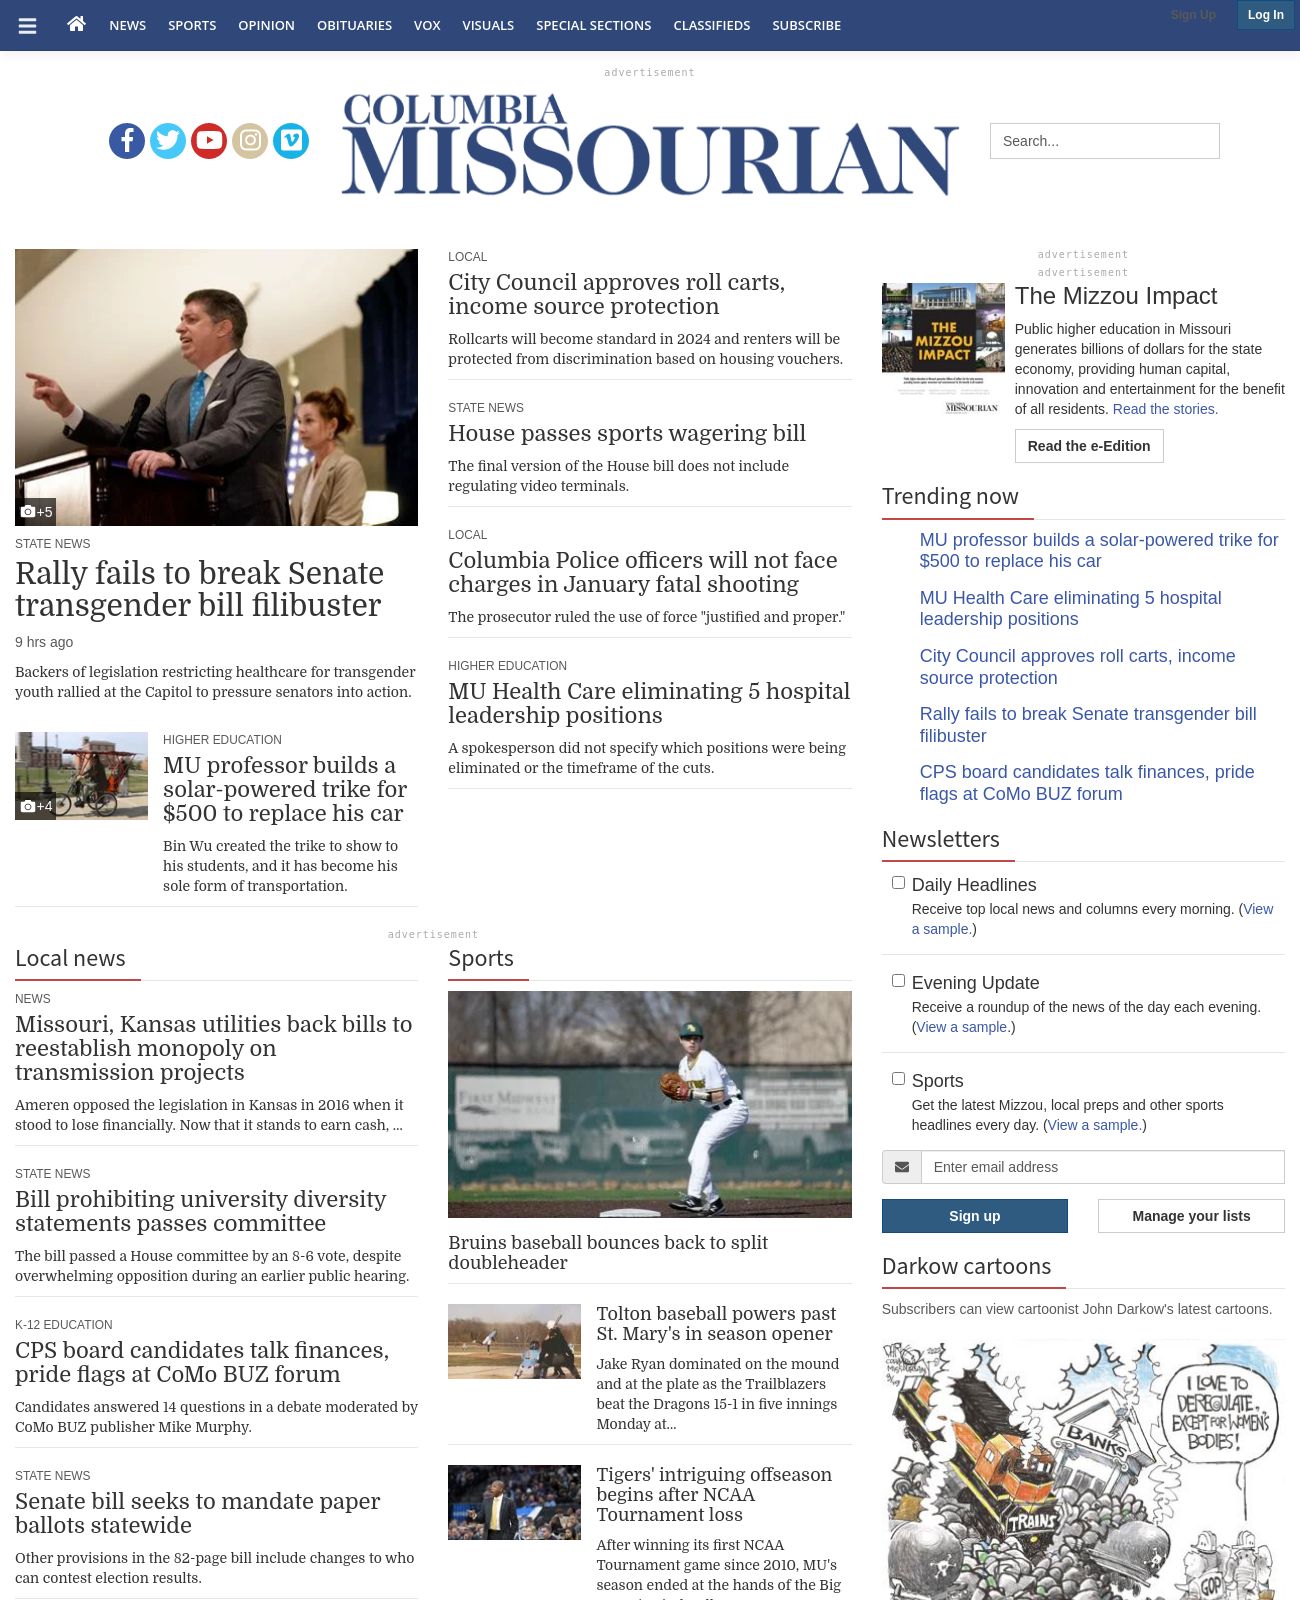 Columbia Missourian at 2023-03-21 05:38:02-05:00 local time